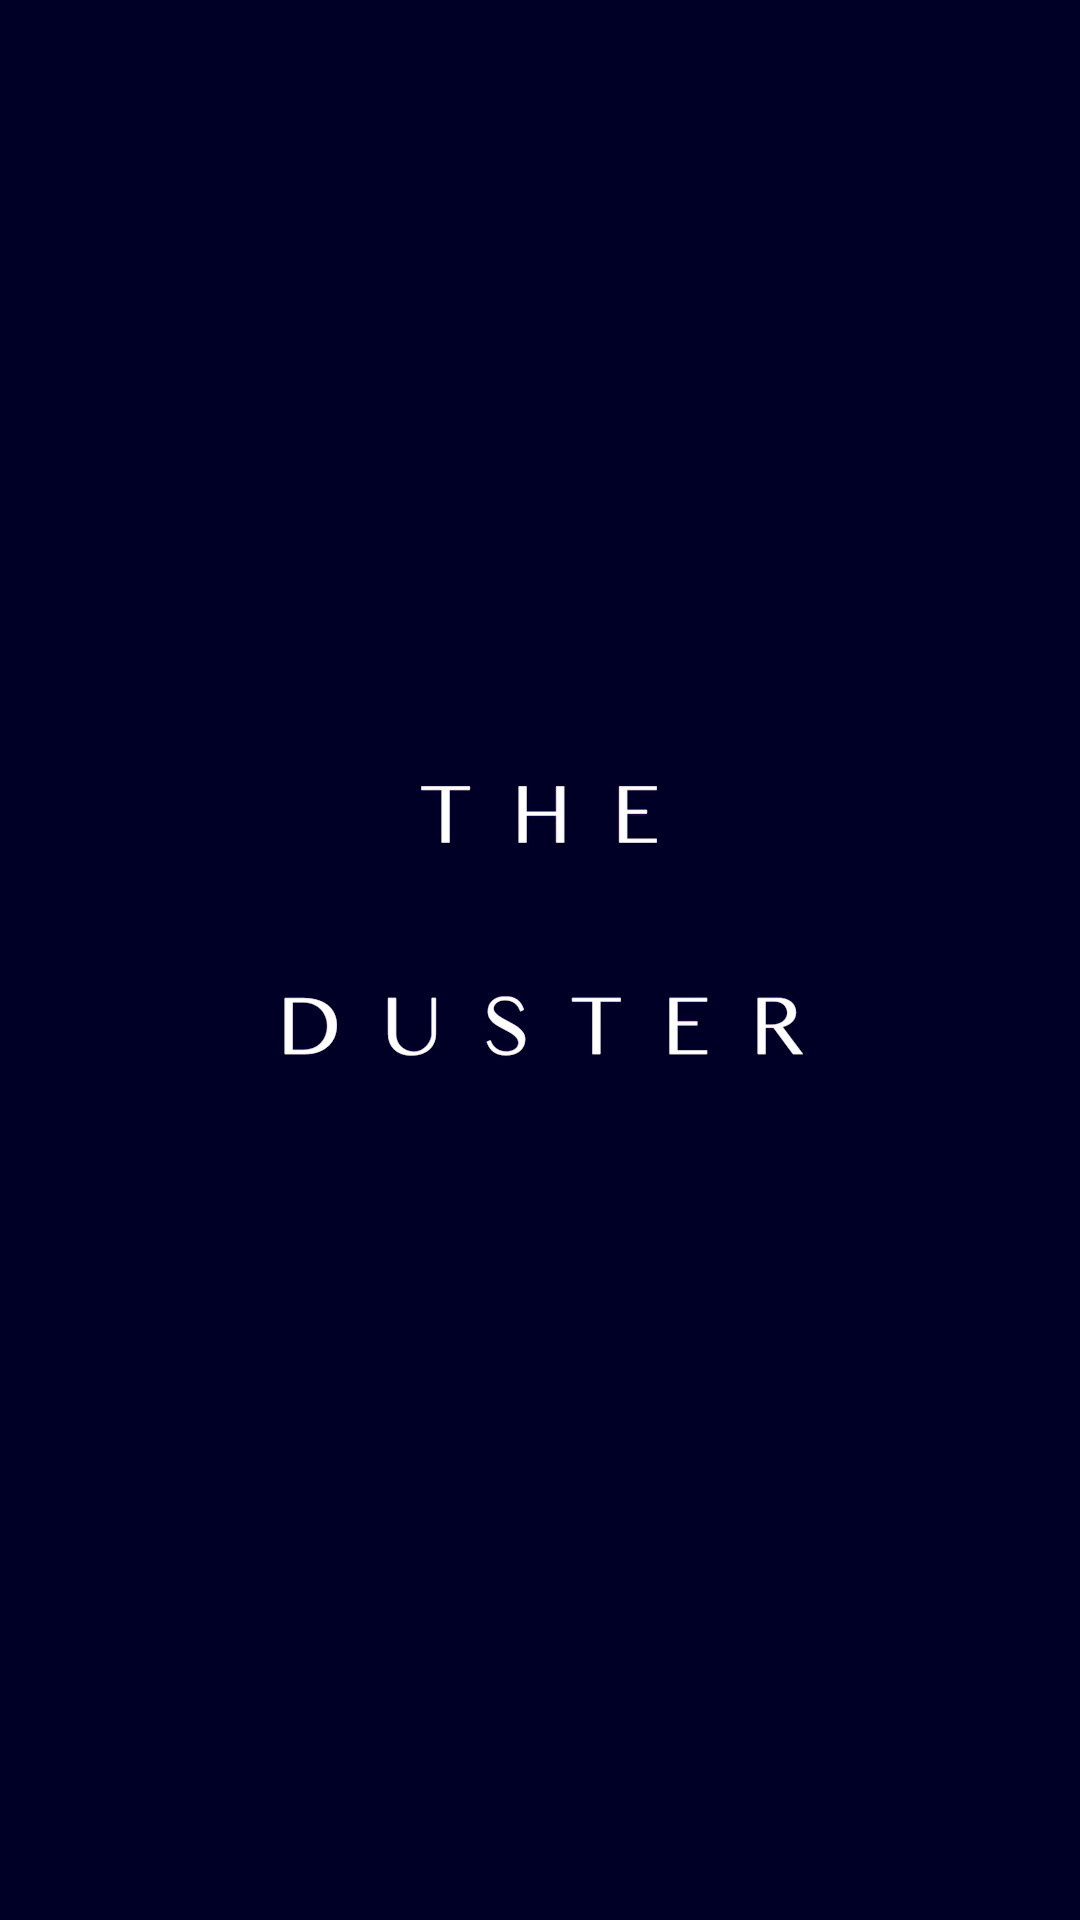 The Duster - The Duster -   21 style Guides videos ideas